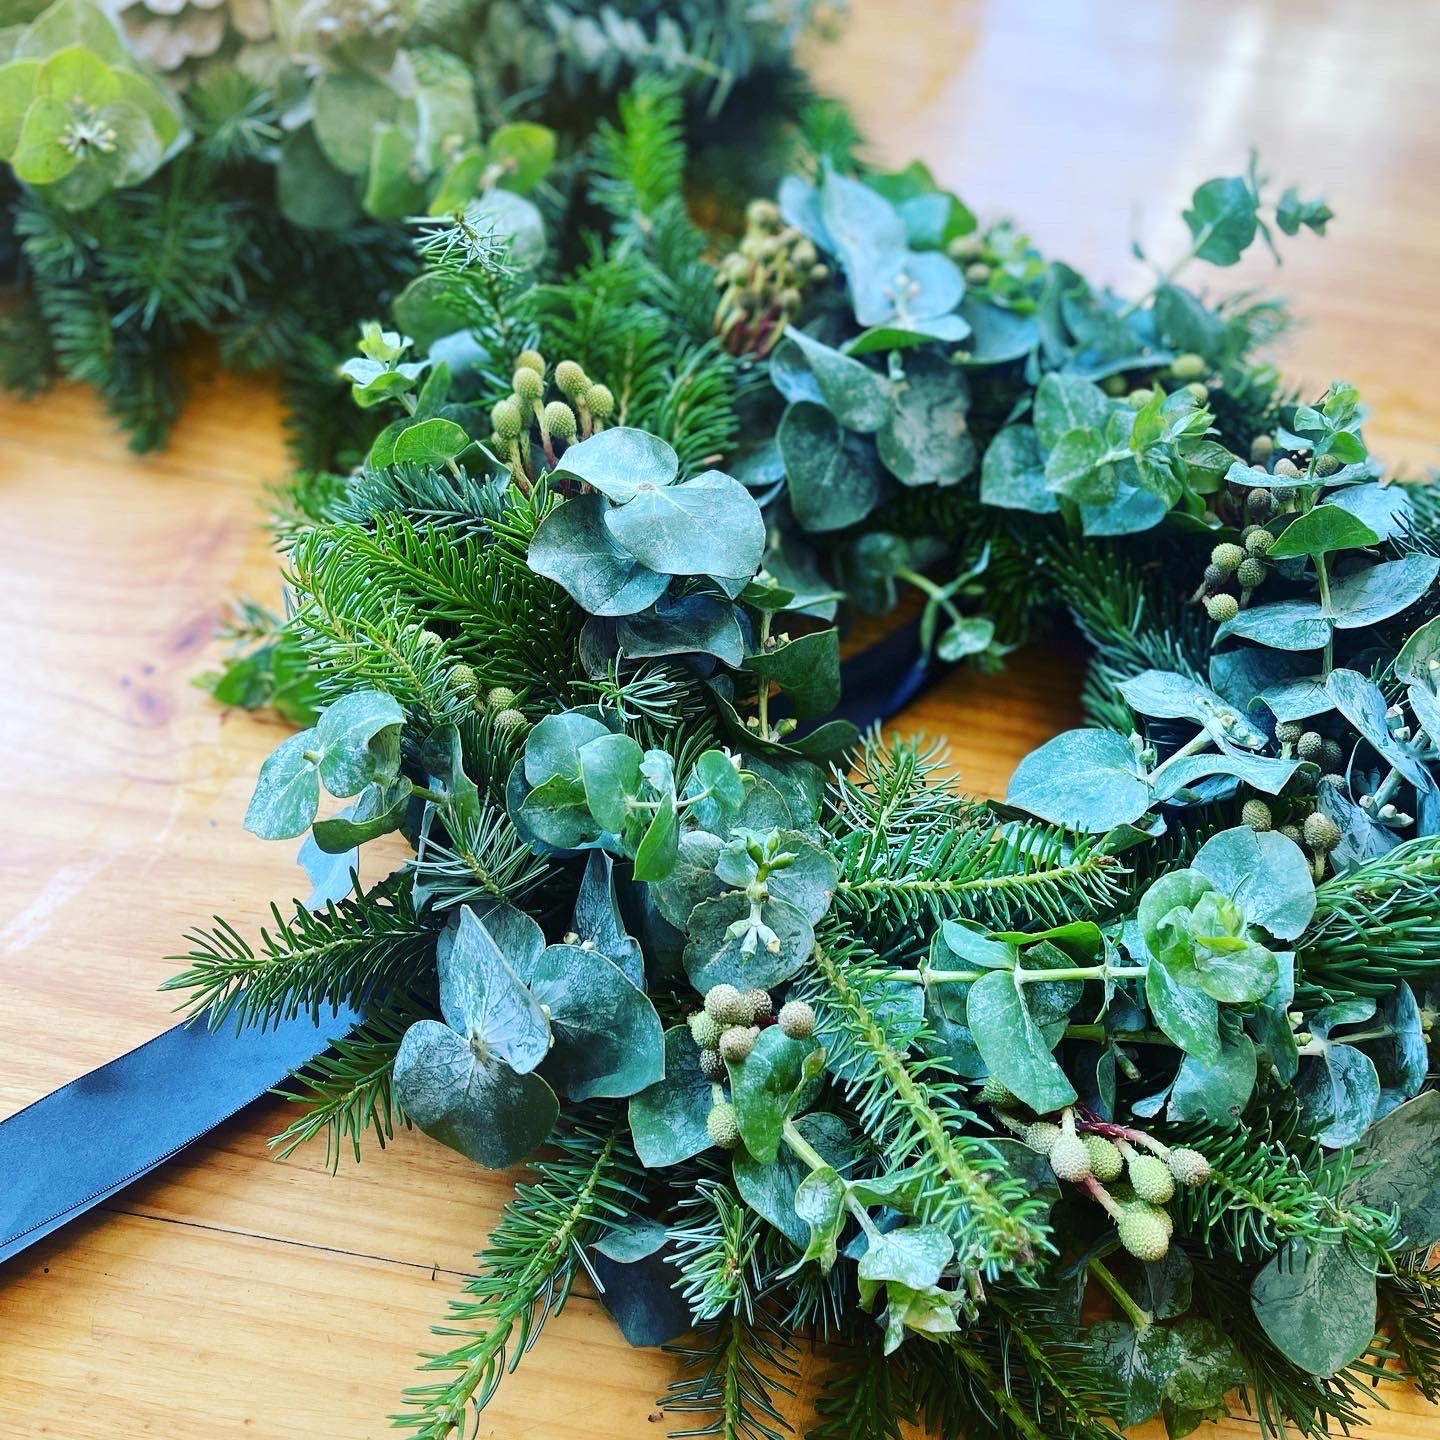 Designing a festive wreath at home